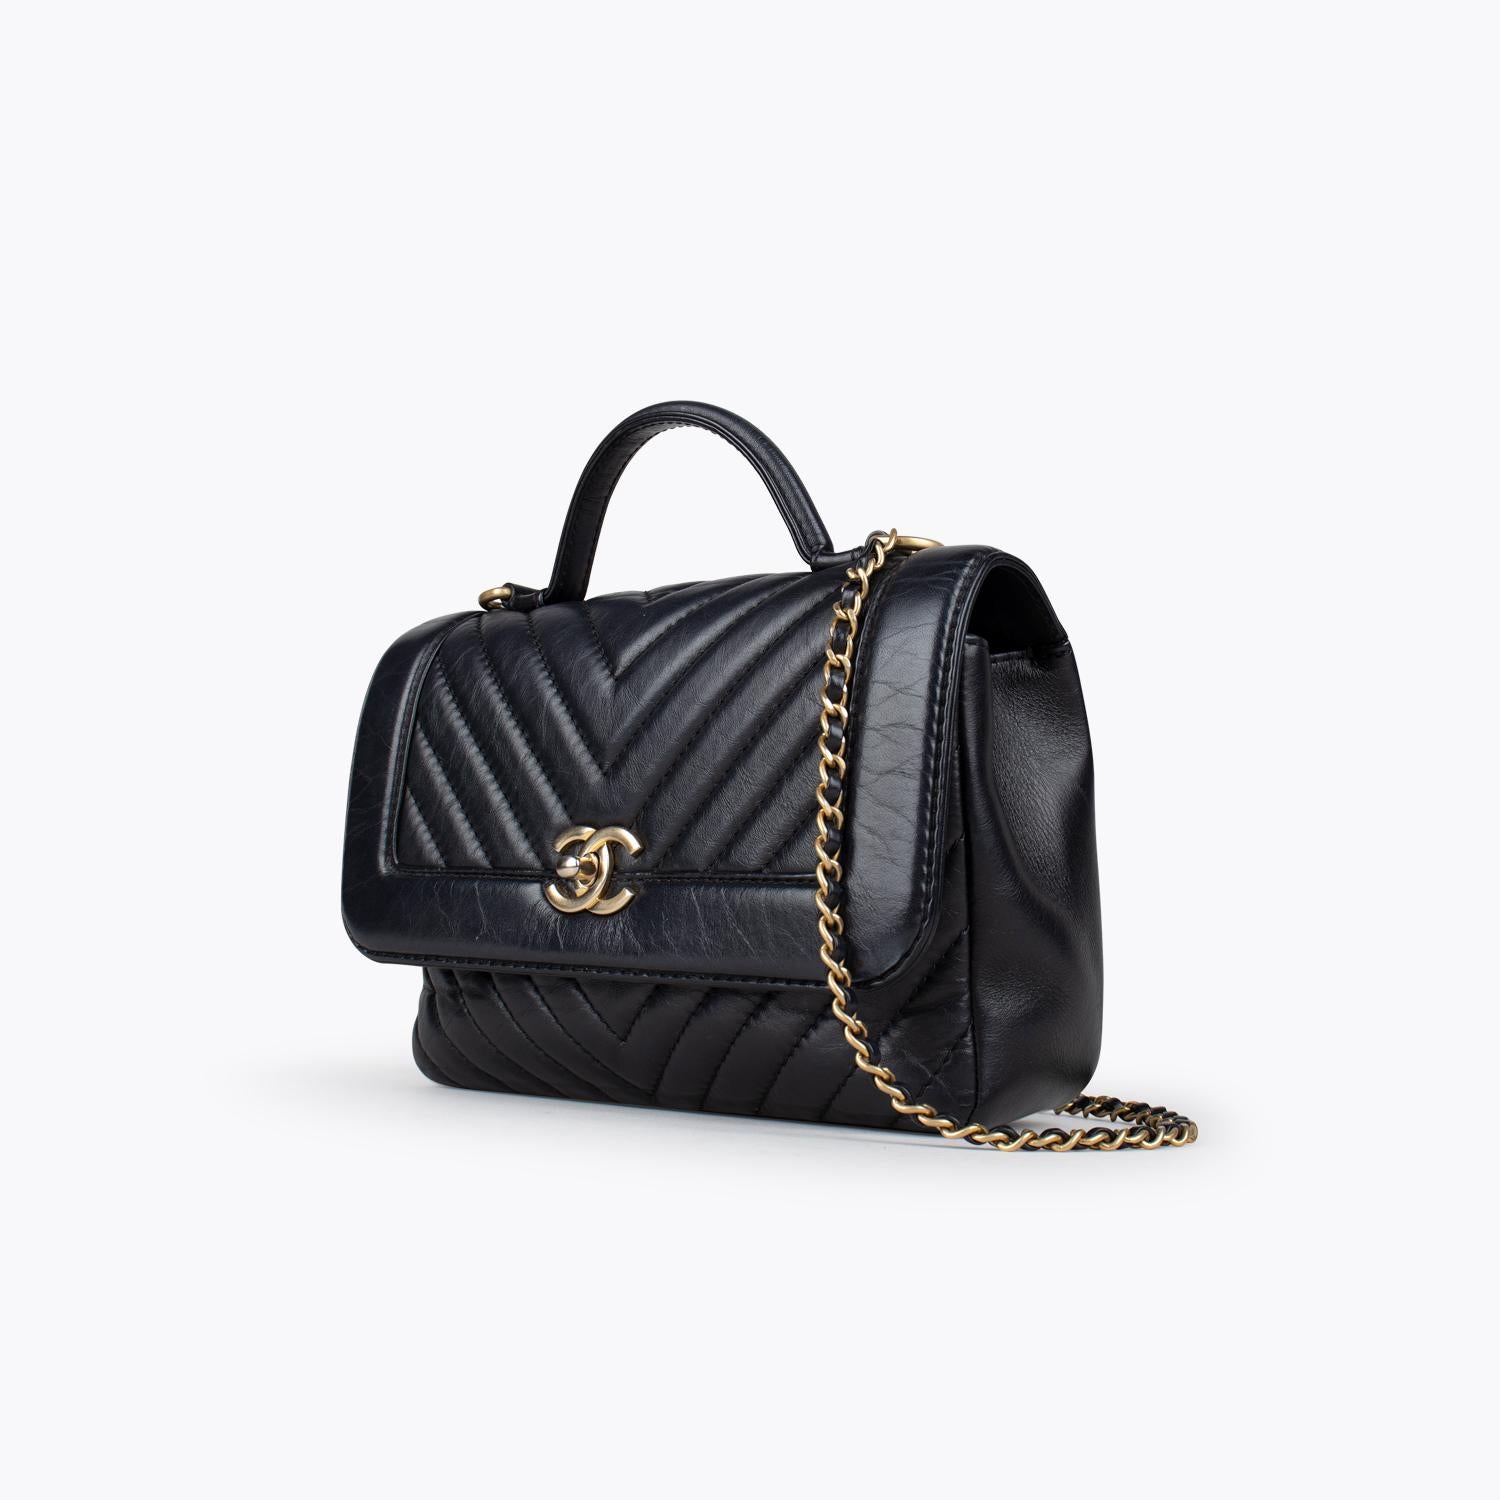 Chanel Chevron Top Handle Flap Bag

- Black Leather
- Antiqued Gold-Tone Hardware
- Flat Handle & Chain-Link Shoulder Strap
- Chain-Link Accents & Single Exterior Pocket
- Grosgrain Lining & Single Interior Pocket
- Turn-Lock Closure at